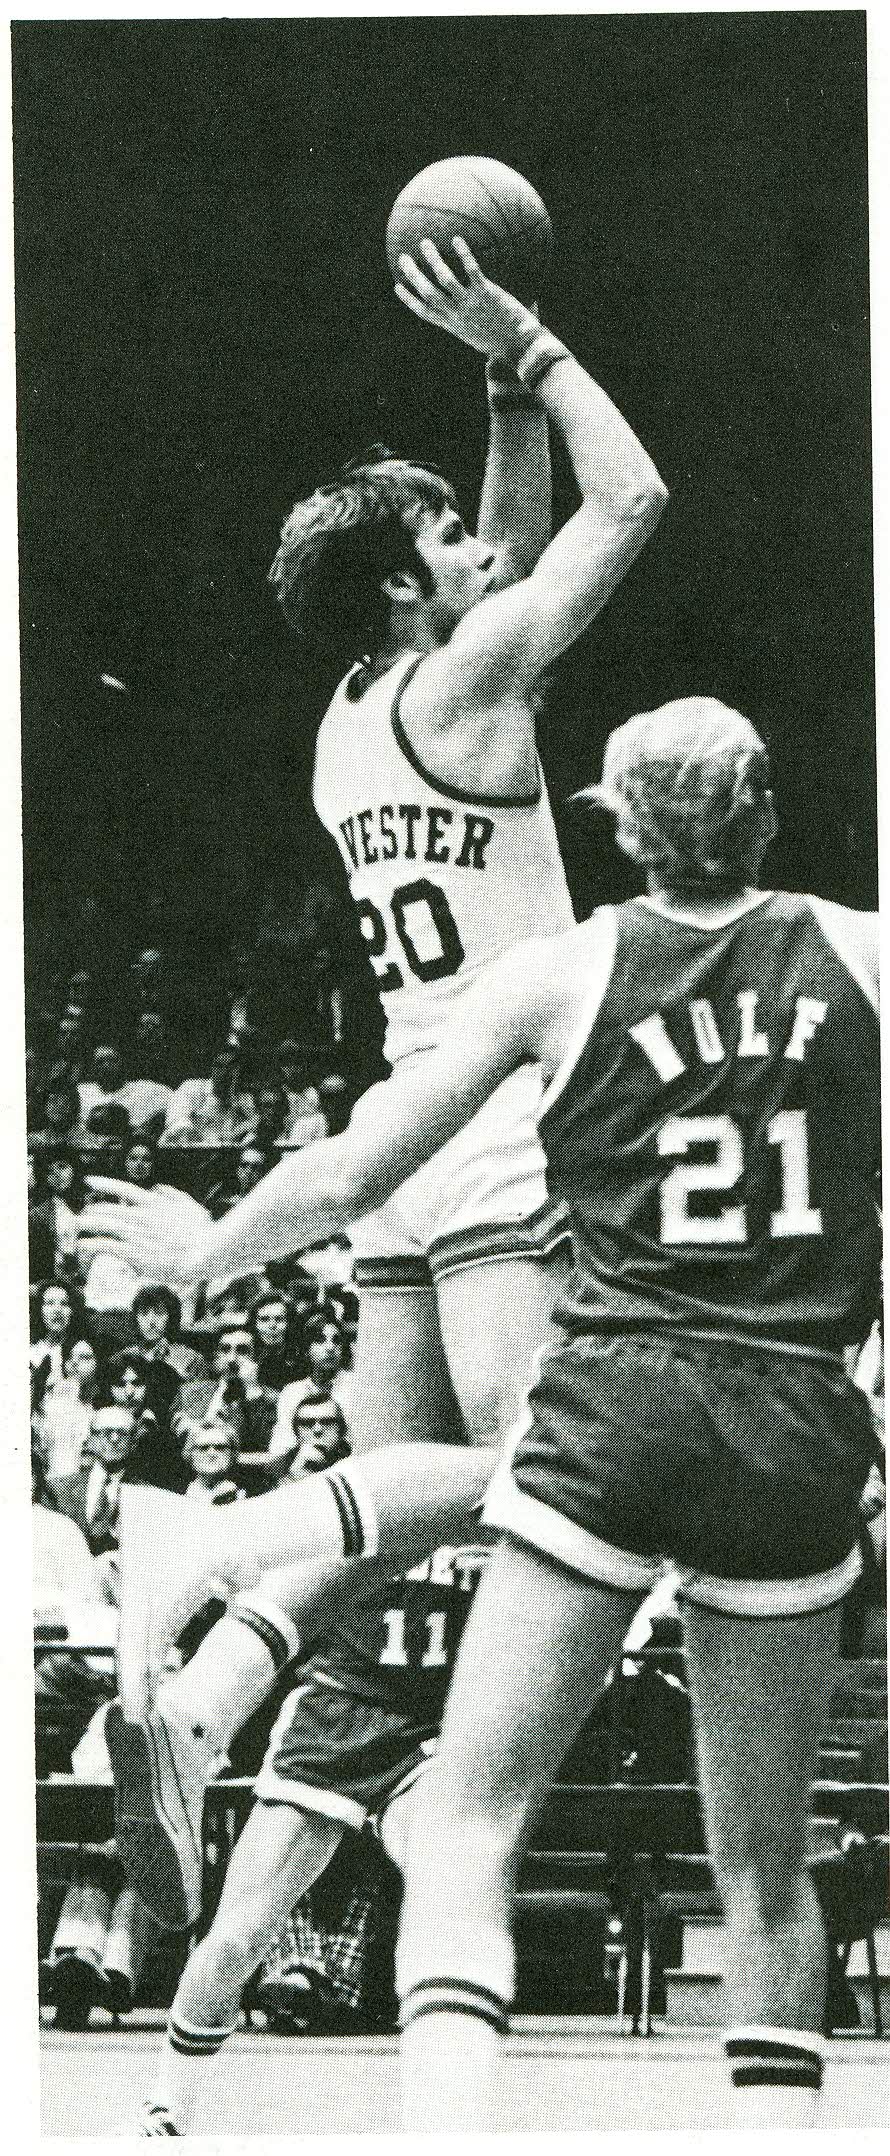 Mike Sylvester, #20, playing for the Flyers in 1974.